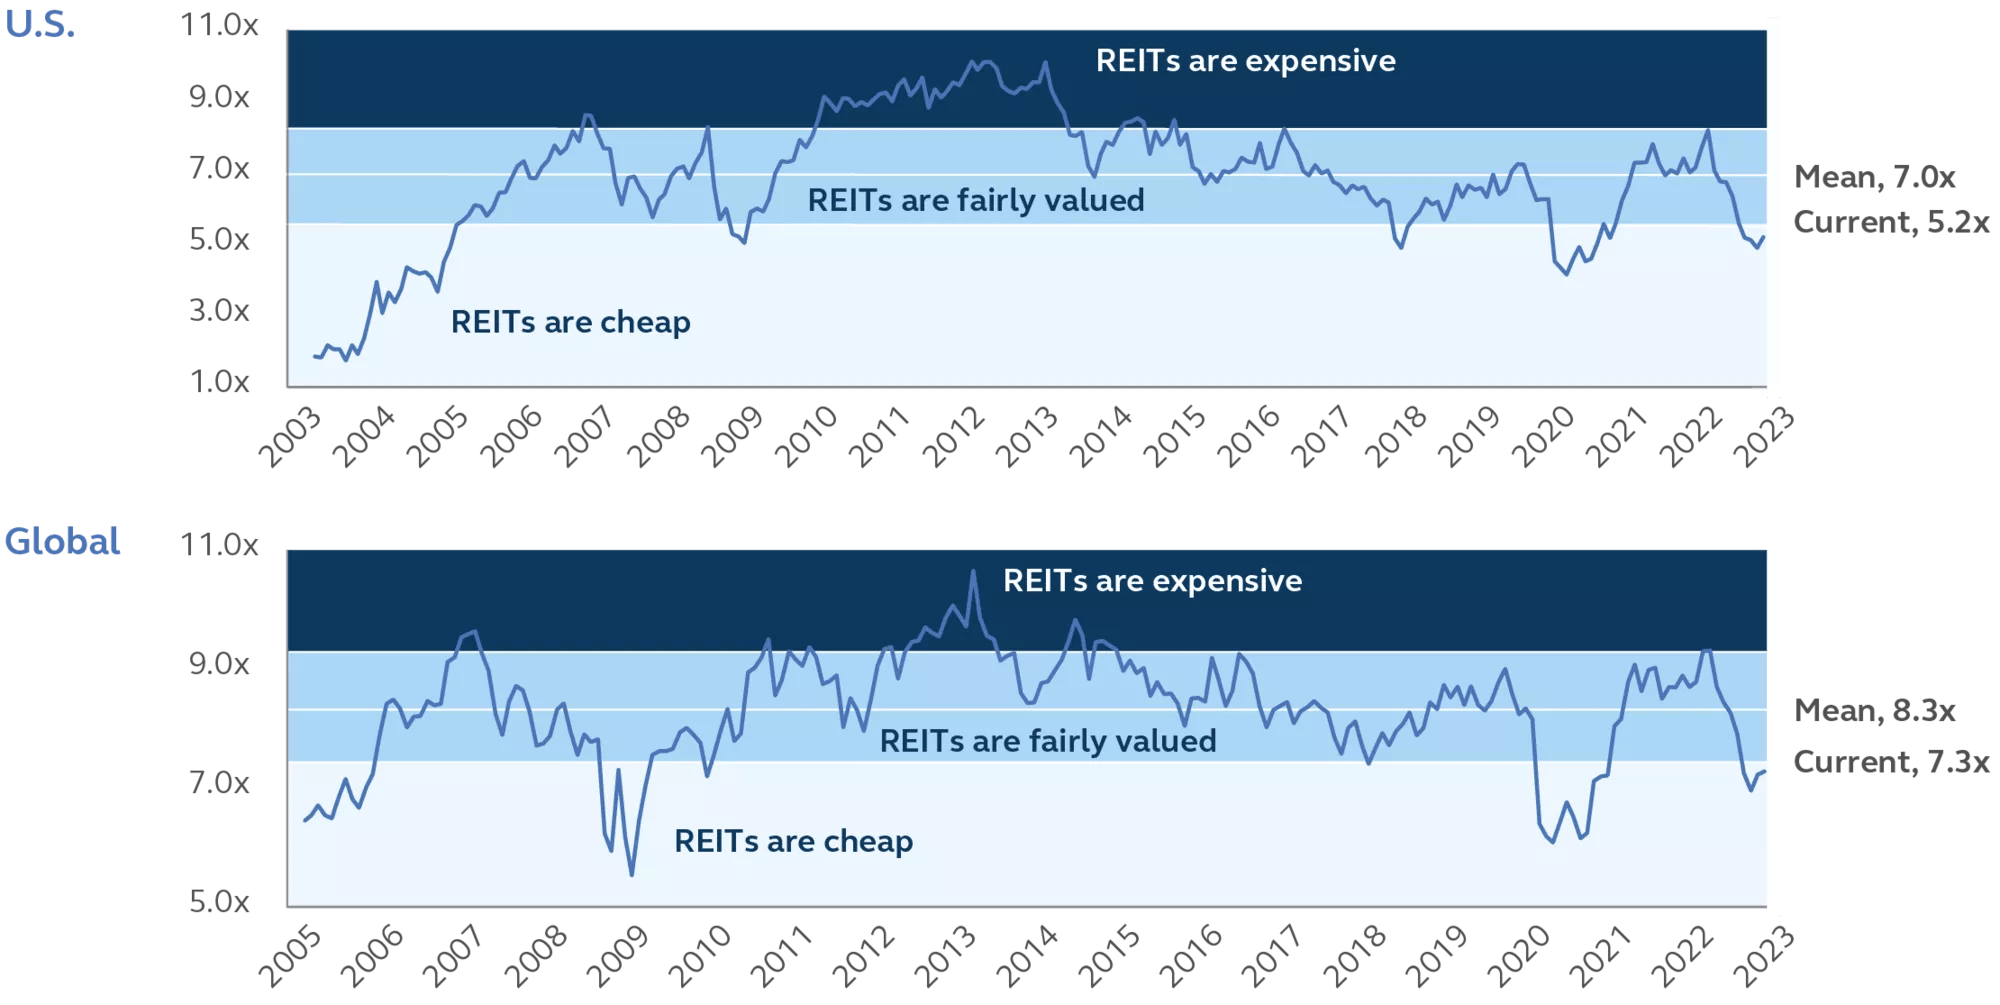 Line graphs of U.S. and Global REITs valuations from 2003-2023